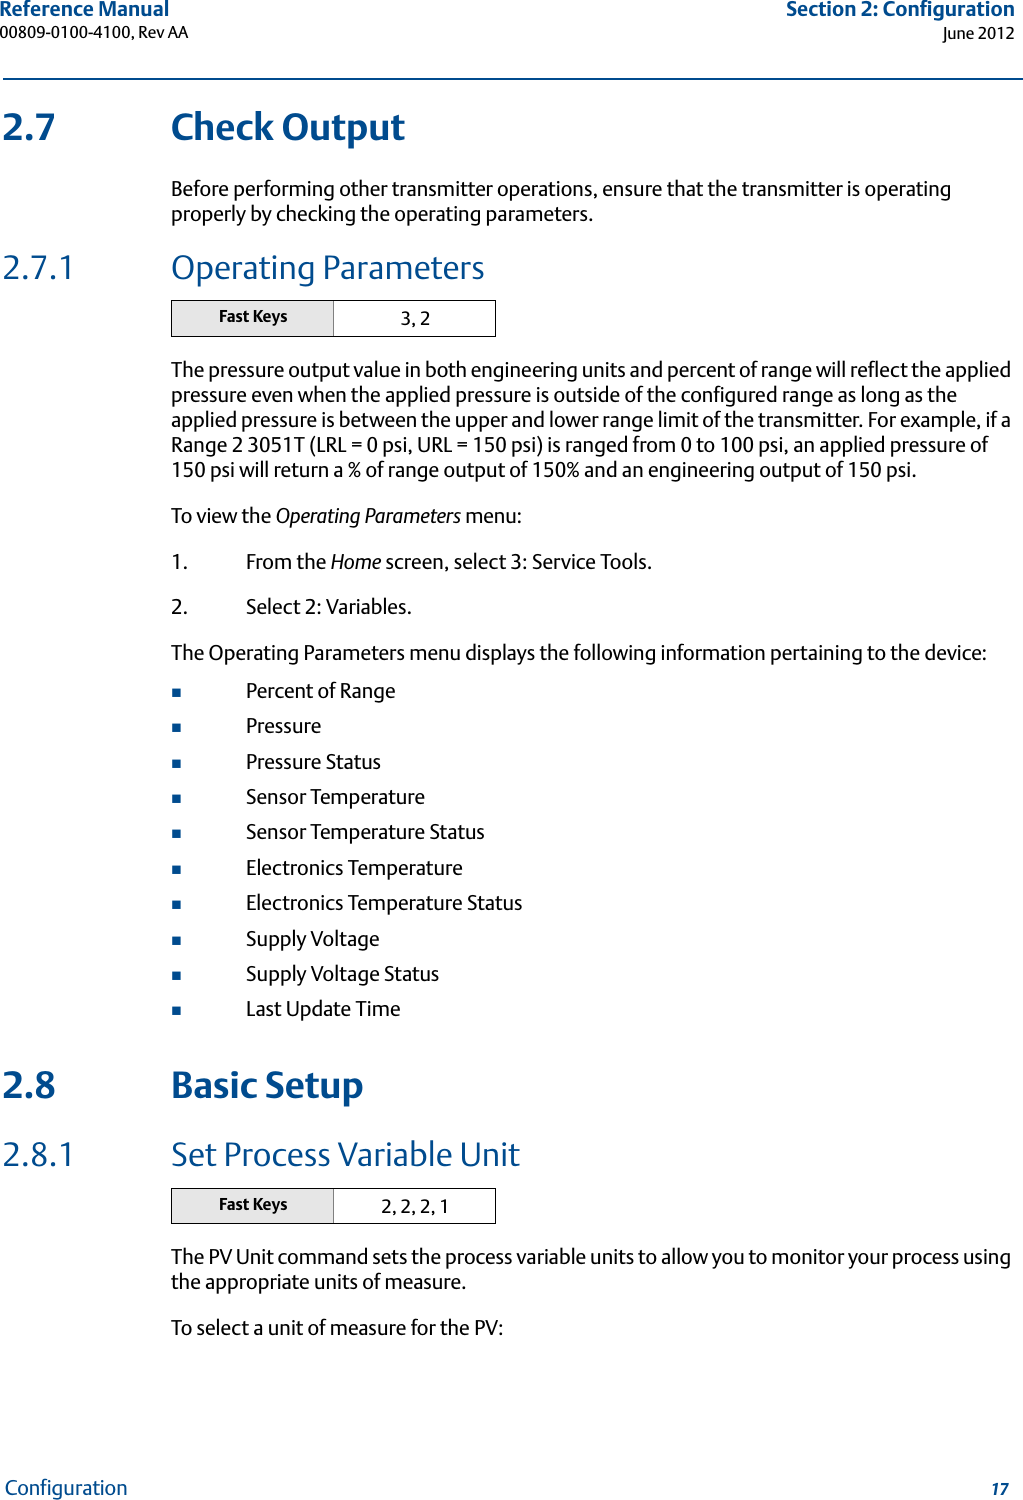 17Reference Manual 00809-0100-4100, Rev AASection 2: ConfigurationJune 2012Configuration2.7 Check OutputBefore performing other transmitter operations, ensure that the transmitter is operating properly by checking the operating parameters.2.7.1 Operating ParametersThe pressure output value in both engineering units and percent of range will reflect the applied pressure even when the applied pressure is outside of the configured range as long as the applied pressure is between the upper and lower range limit of the transmitter. For example, if a Range 2 3051T (LRL = 0 psi, URL = 150 psi) is ranged from 0 to 100 psi, an applied pressure of 150 psi will return a % of range output of 150% and an engineering output of 150 psi.To view the Operating Parameters menu:1. From the Home screen, select 3: Service Tools.2. Select 2: Variables.The Operating Parameters menu displays the following information pertaining to the device:Percent of RangePressurePressure StatusSensor TemperatureSensor Temperature StatusElectronics TemperatureElectronics Temperature StatusSupply VoltageSupply Voltage StatusLast Update Time2.8 Basic Setup2.8.1 Set Process Variable UnitThe PV Unit command sets the process variable units to allow you to monitor your process using the appropriate units of measure. To select a unit of measure for the PV:Fast Keys 3, 2Fast Keys 2, 2, 2, 1